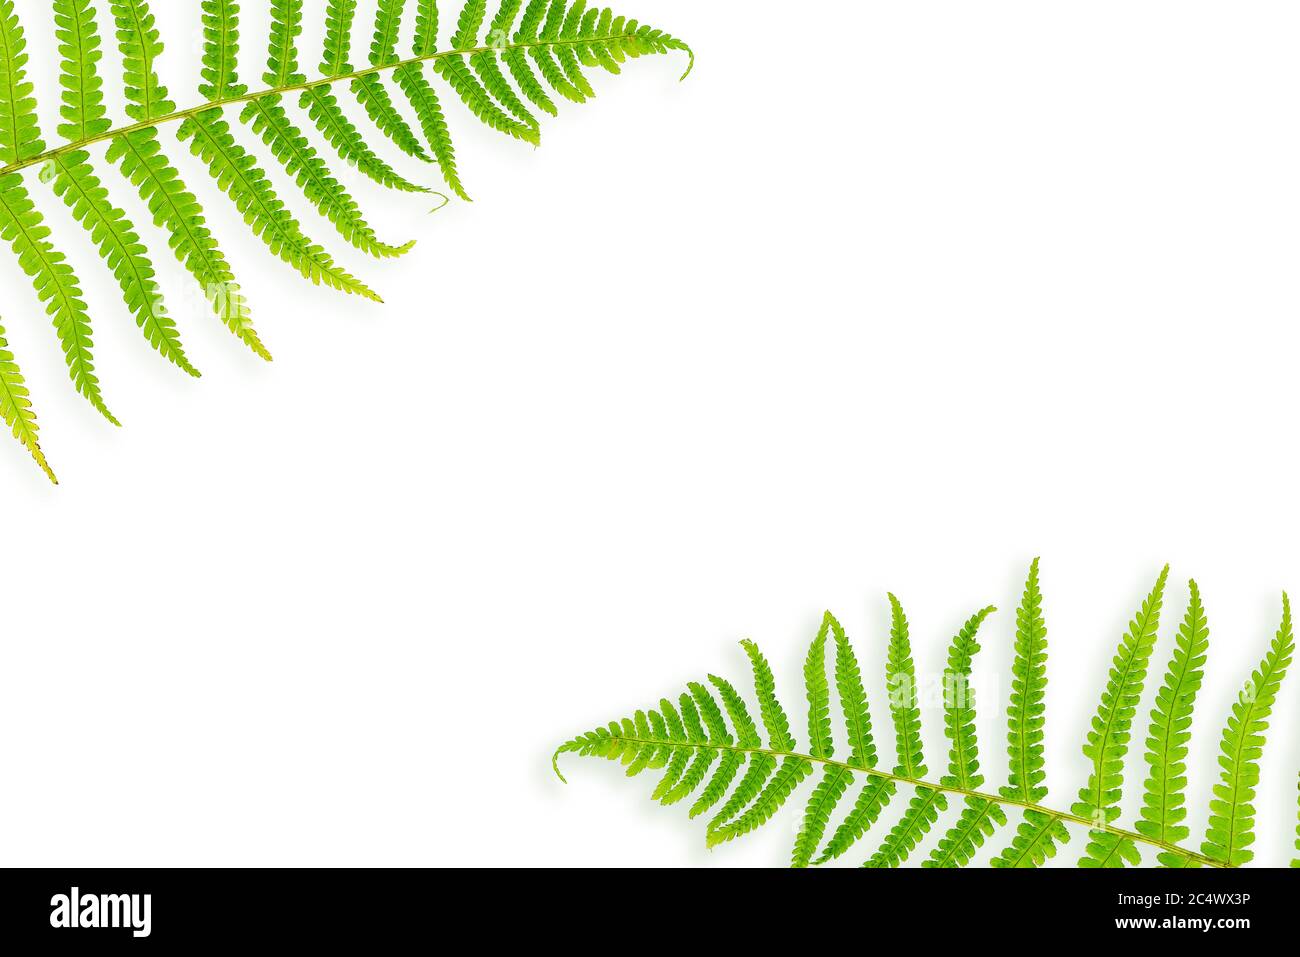 Green fern leaves isolated on a white background. Top view with a copy of the space. Stock Photo